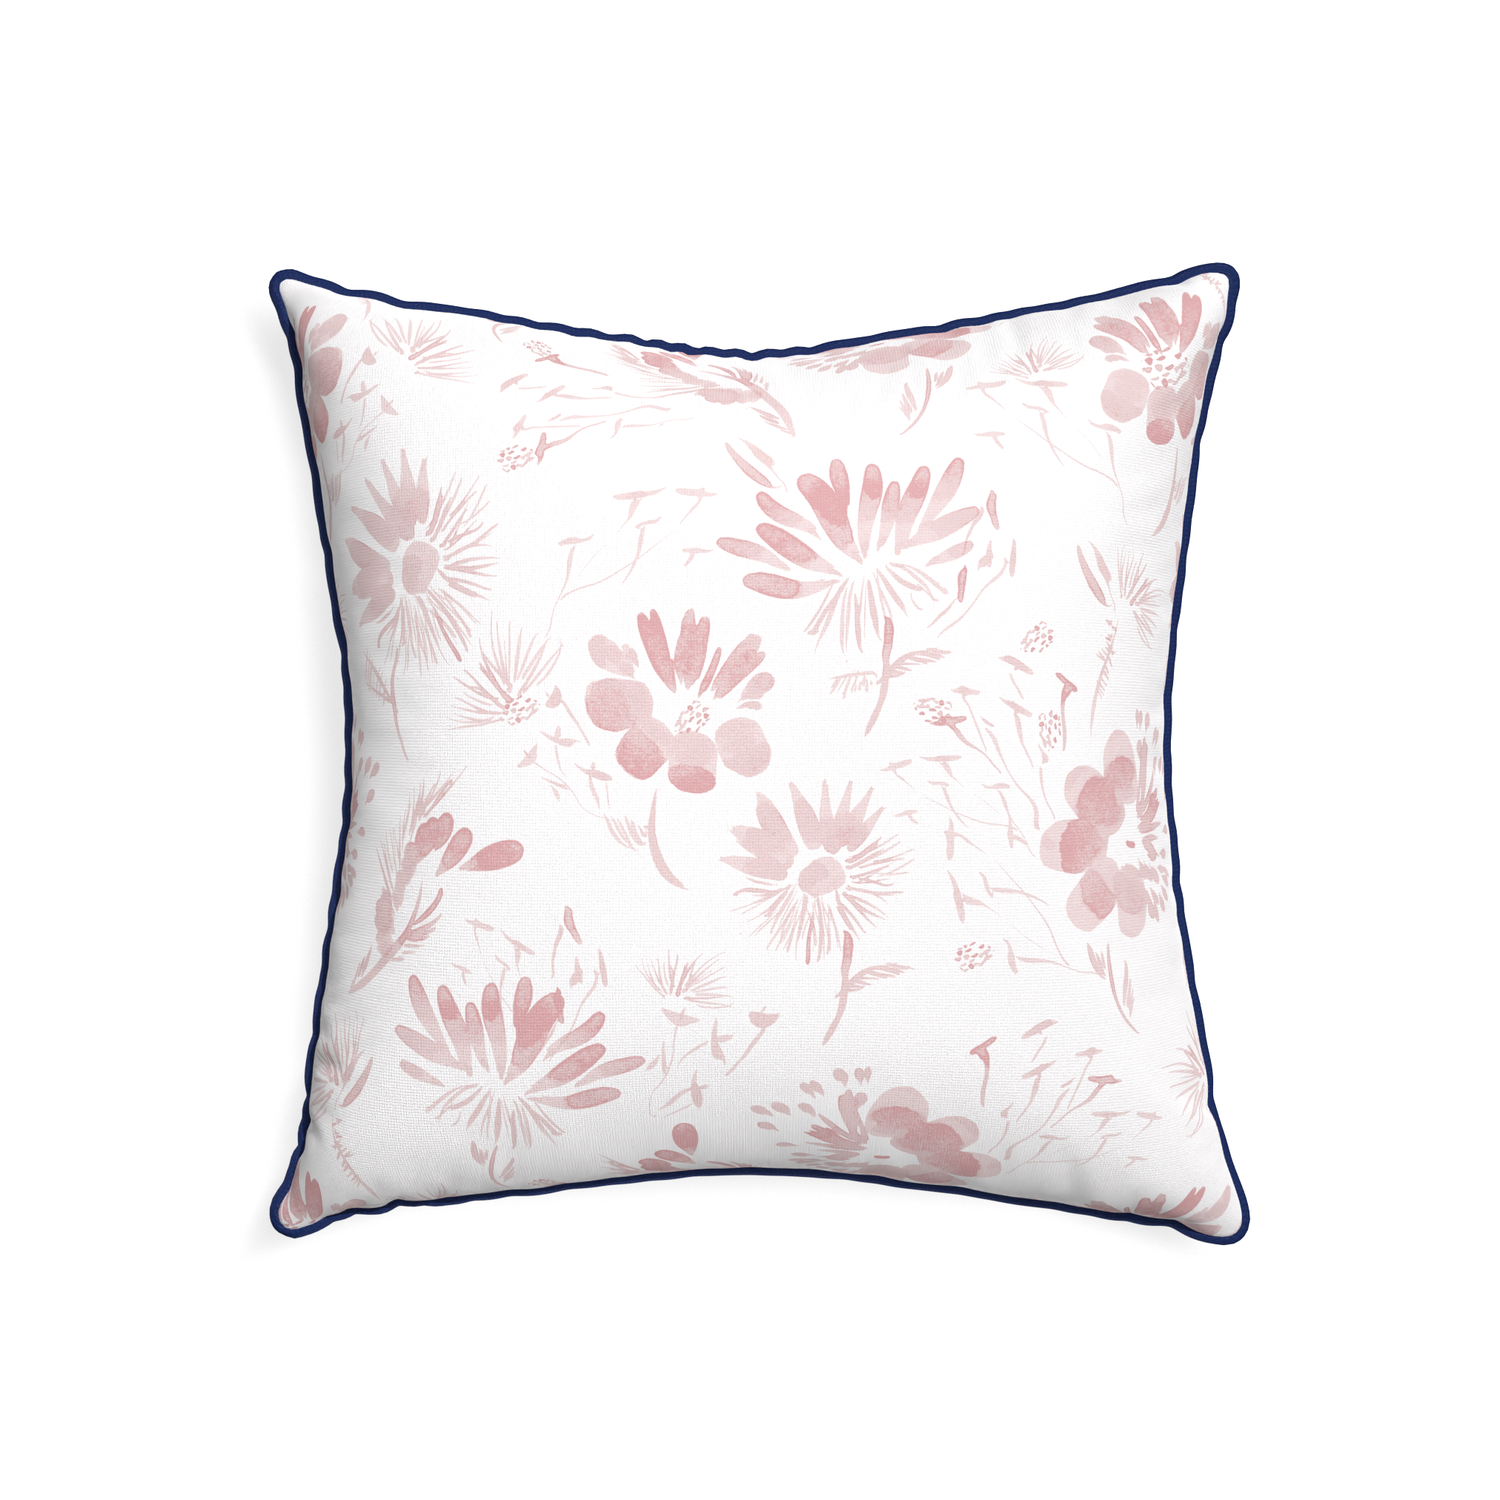 22-square blake custom pink floralpillow with midnight piping on white background